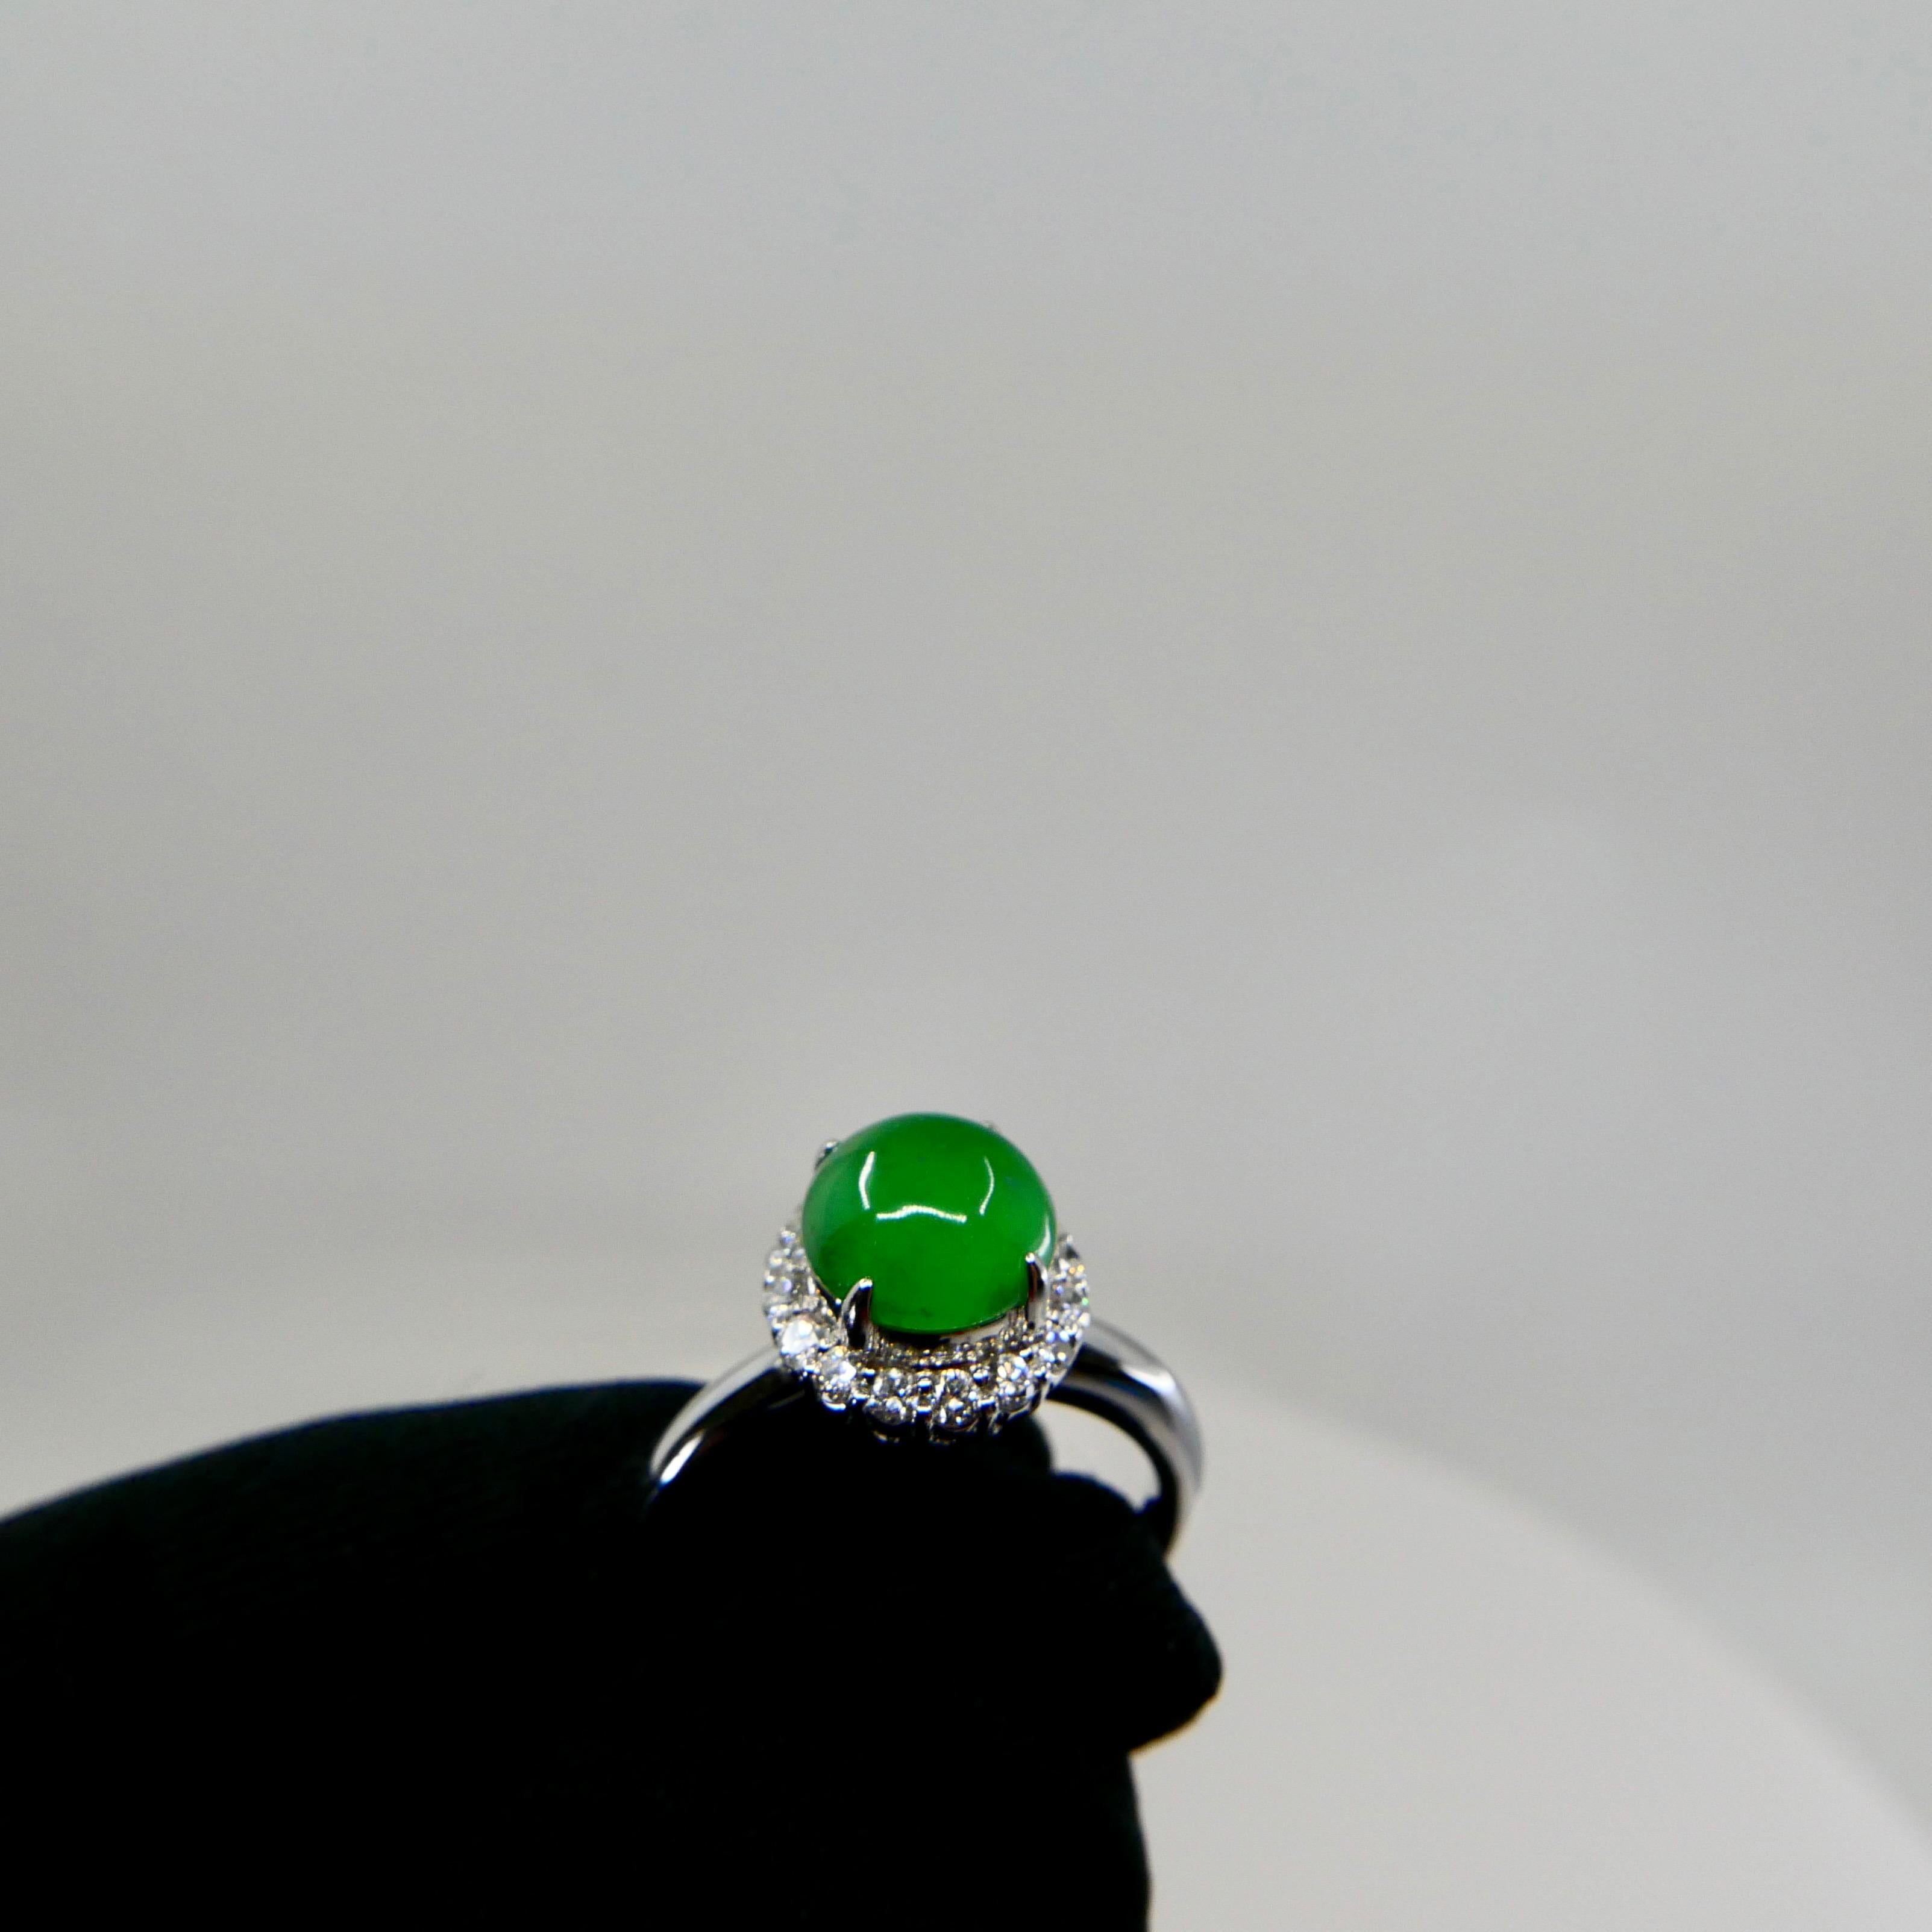 Certified Type A Icy Apple Green Jadeite Jade and Diamond Ring, Super Glow In New Condition For Sale In Hong Kong, HK